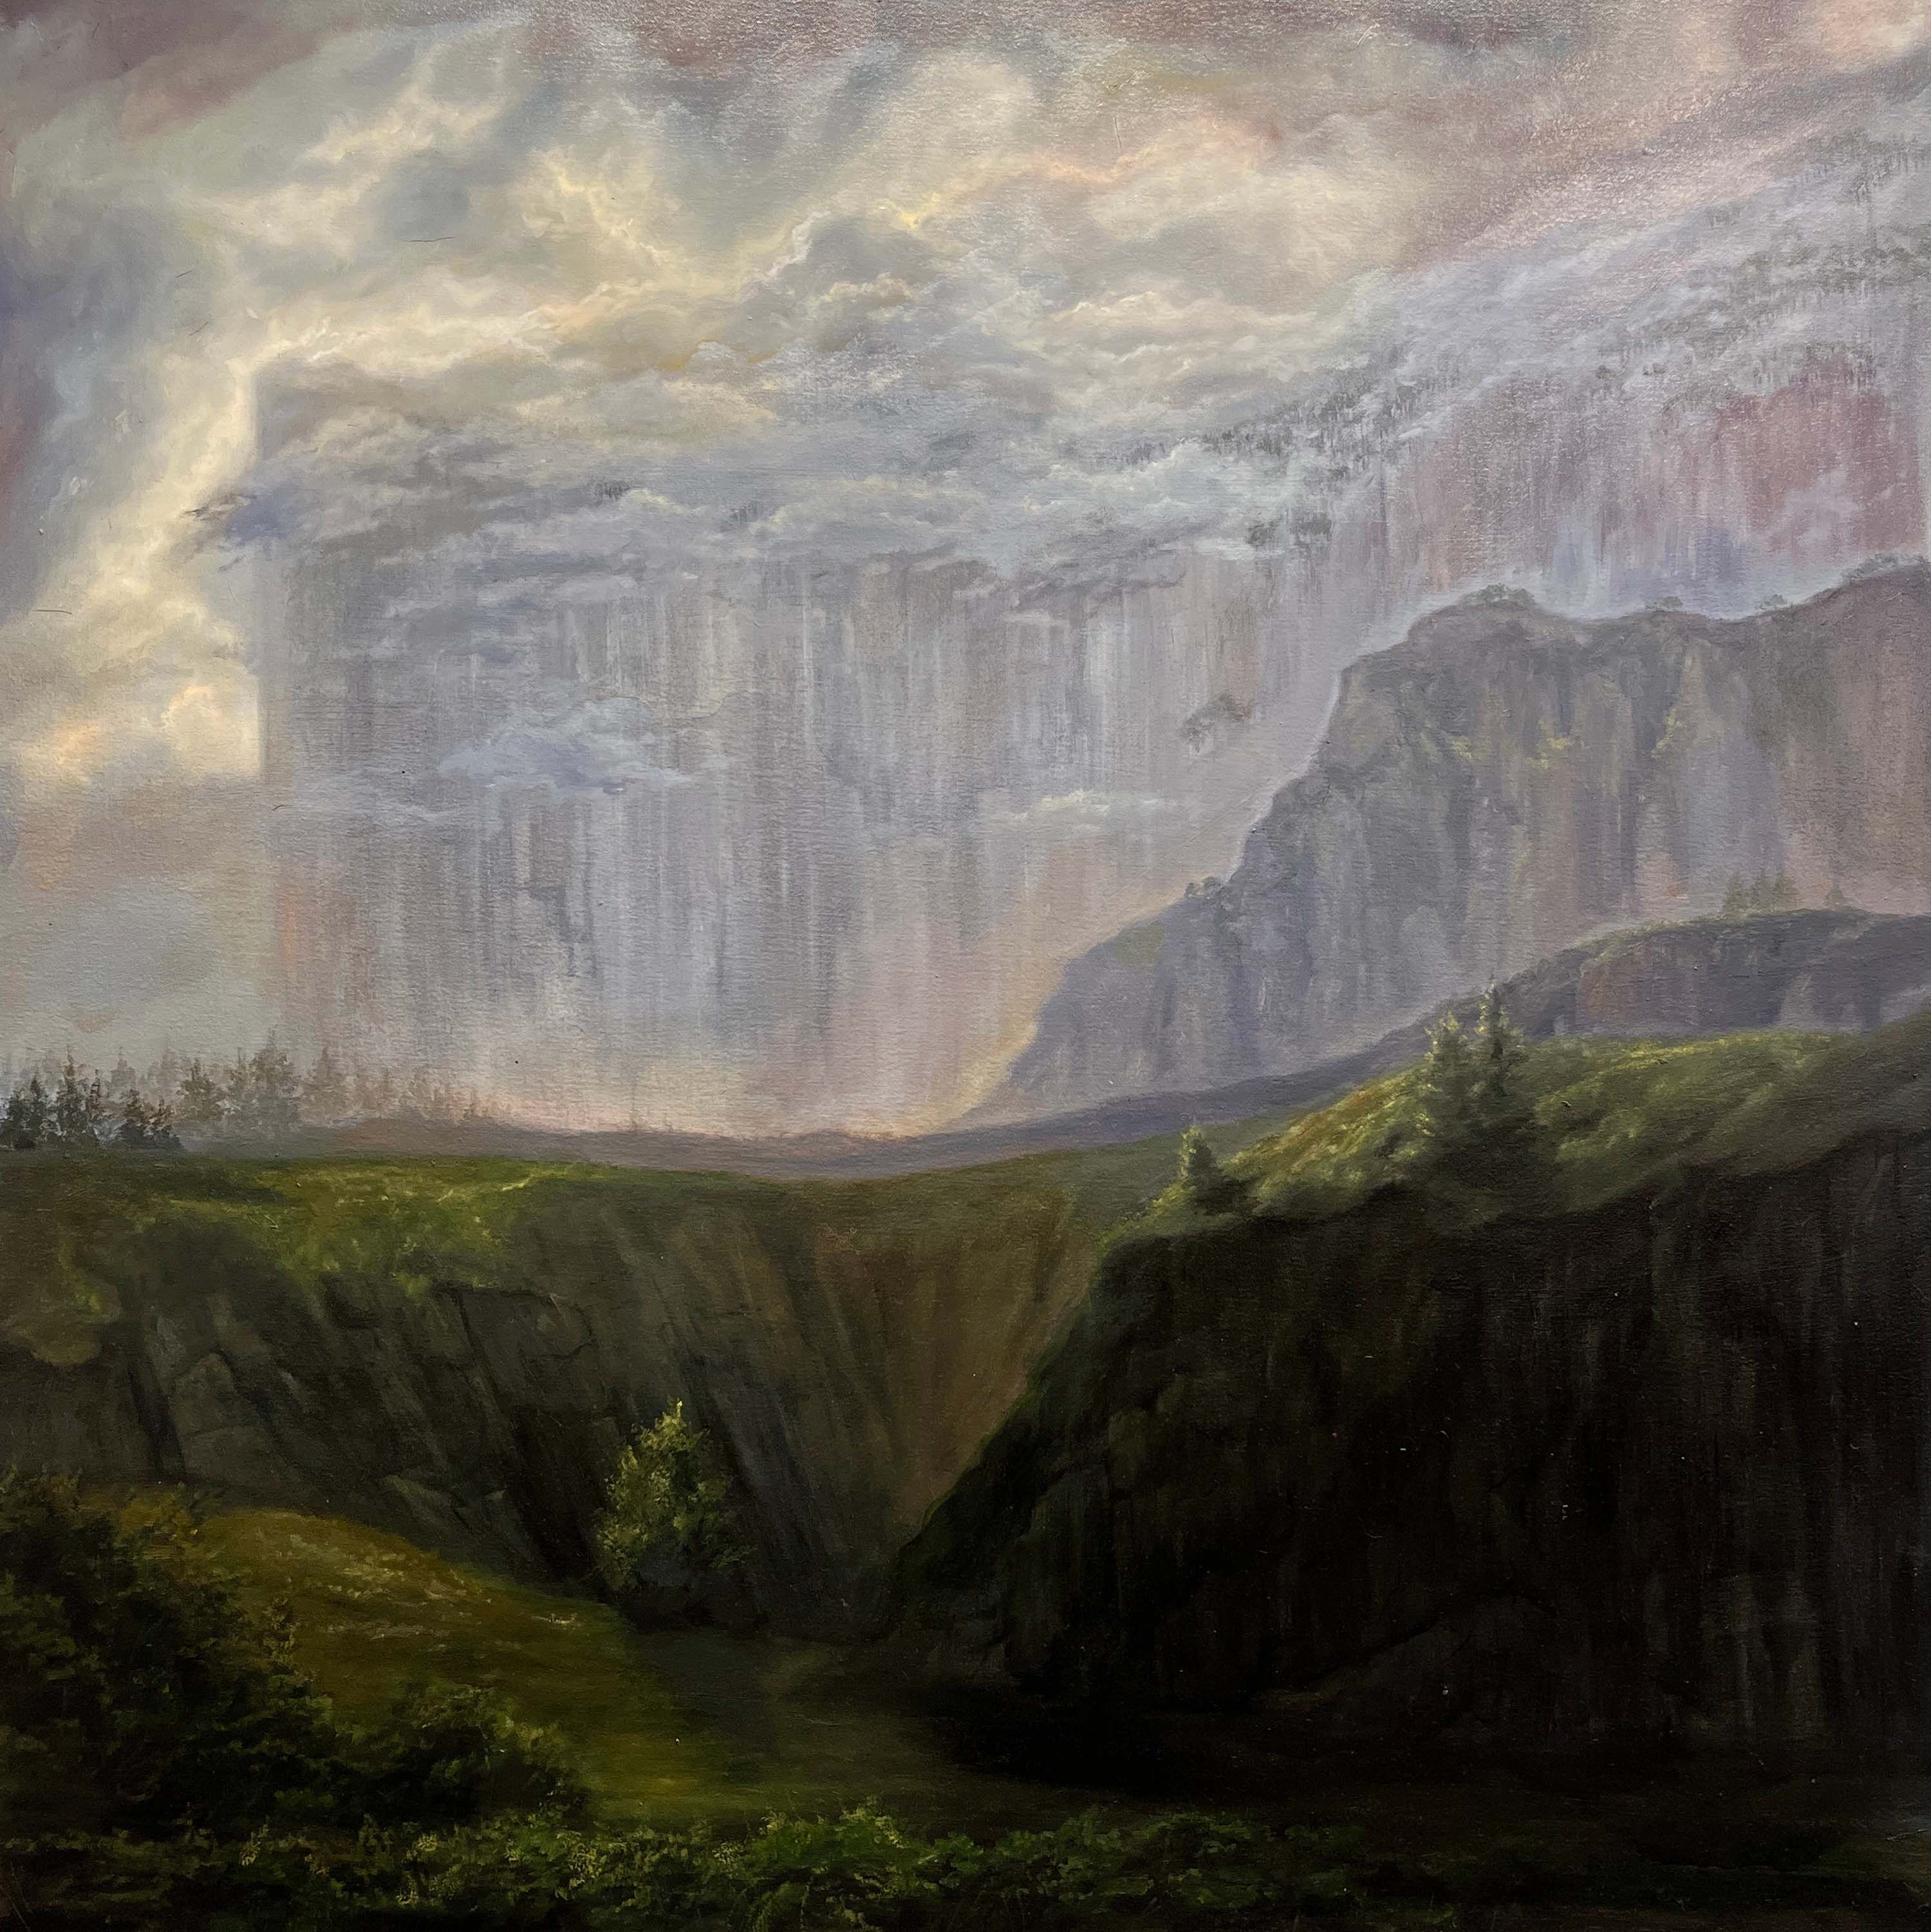 A landscape painting of steep grey mountains and lush green valleys.